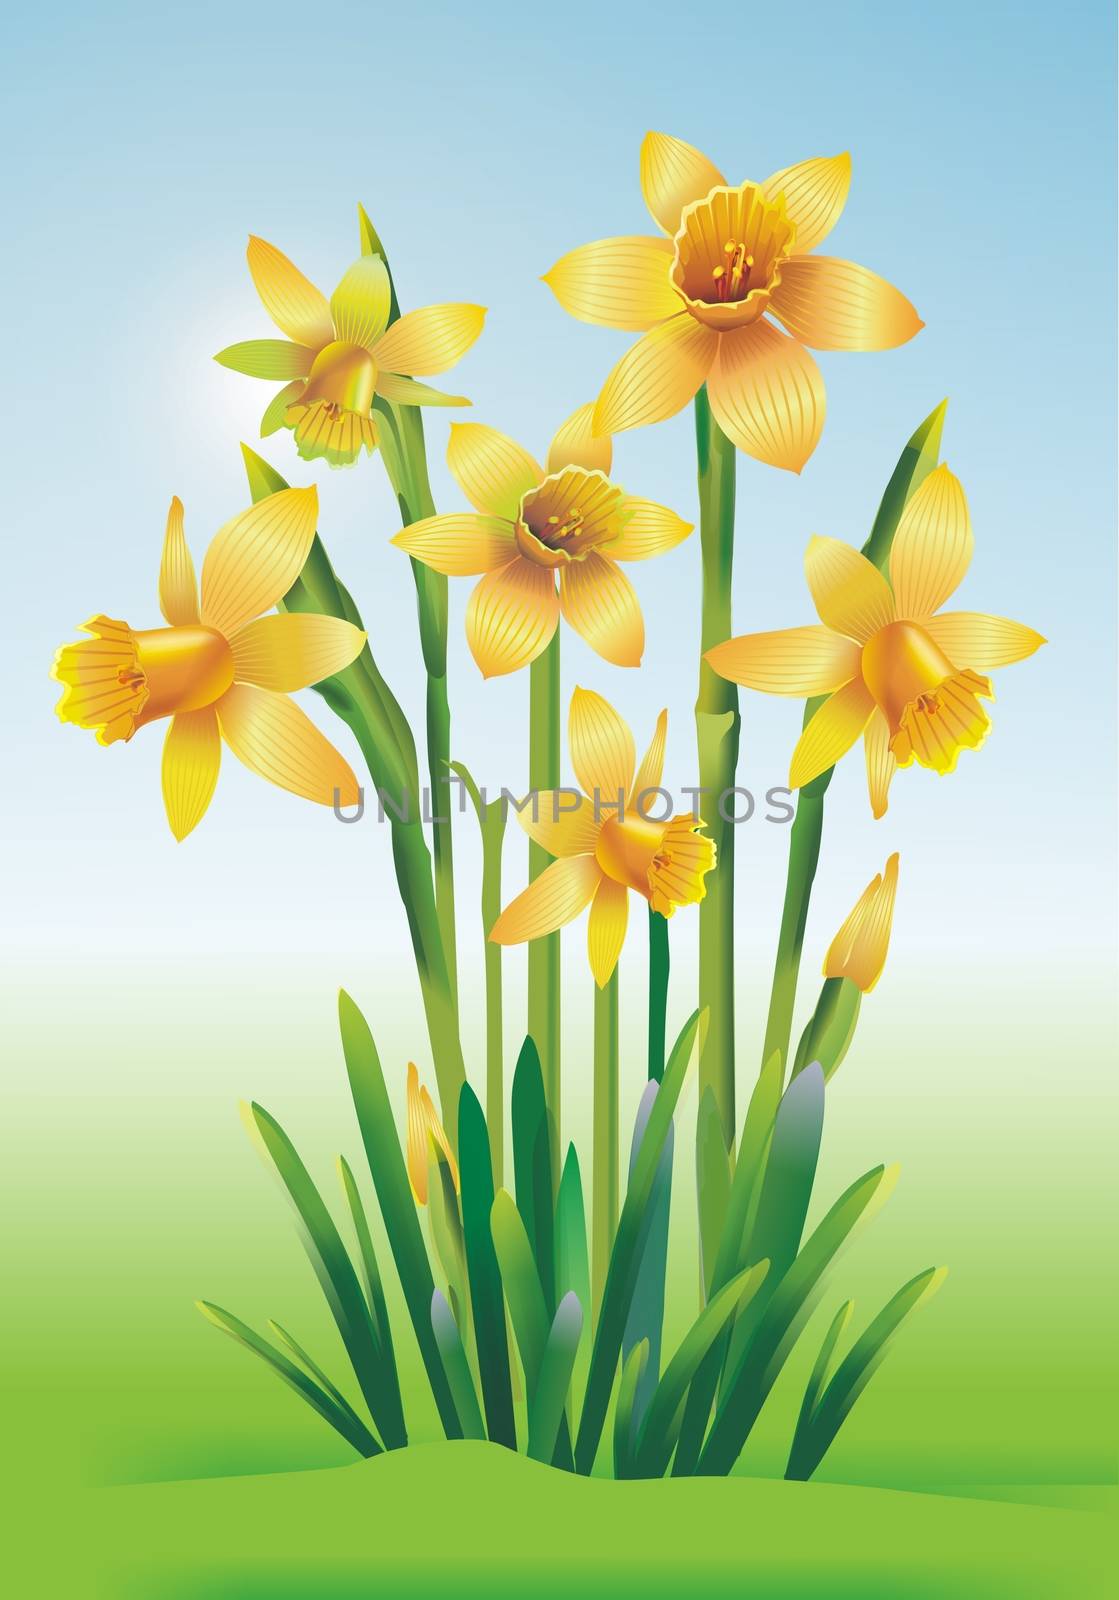 Jonquils Art Illustration by welcomia